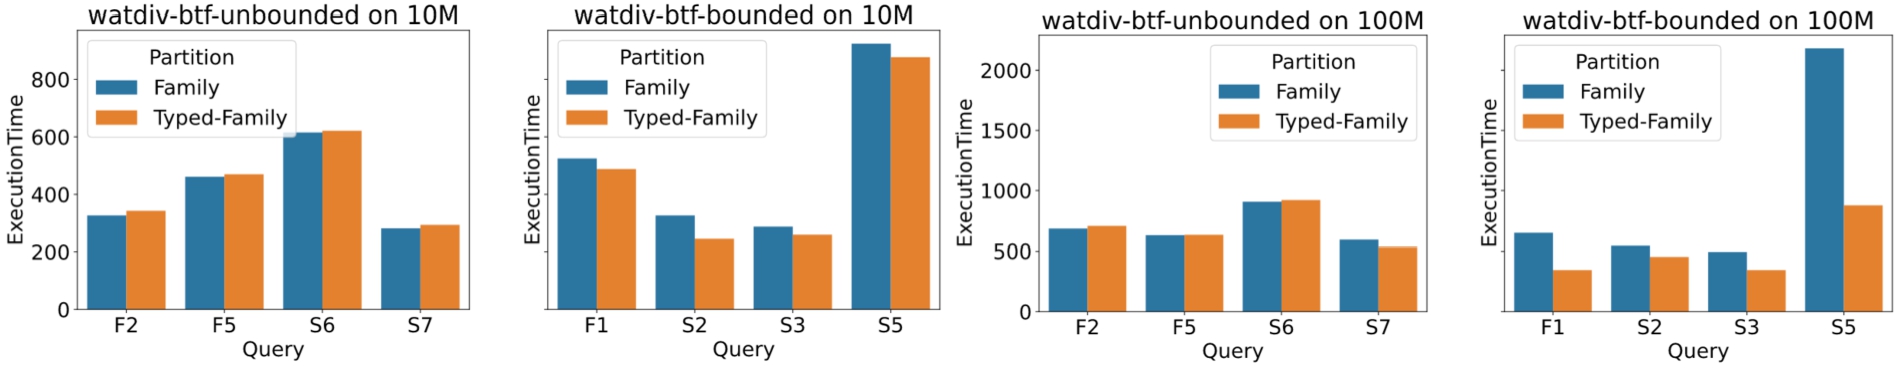 Execution time per query (in ms) over watdiv10M and watdiv100M on watdiv-btfunbounded and watdiv-btfbounded workloads.